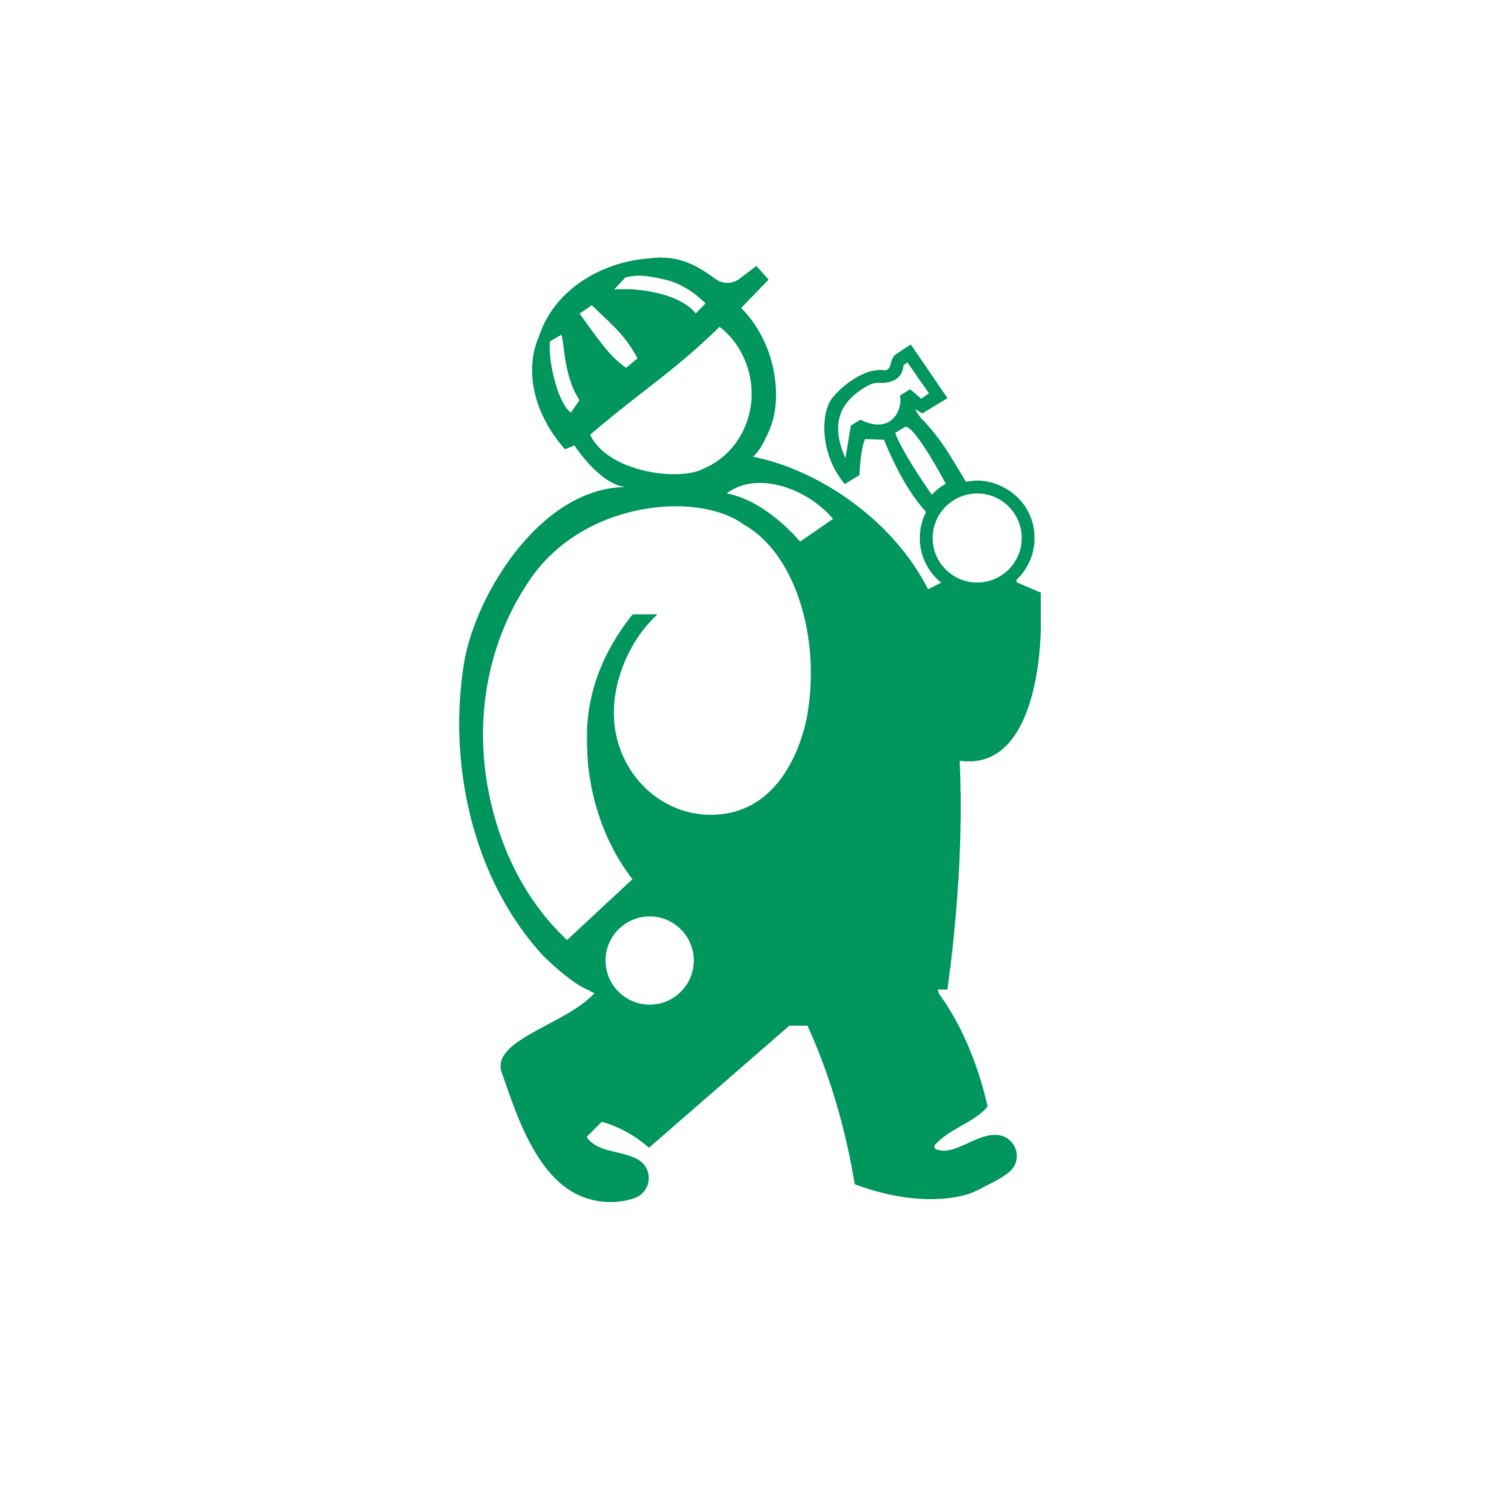 D.J. Kranz Co., Inc. - General Contractors and Project Managers